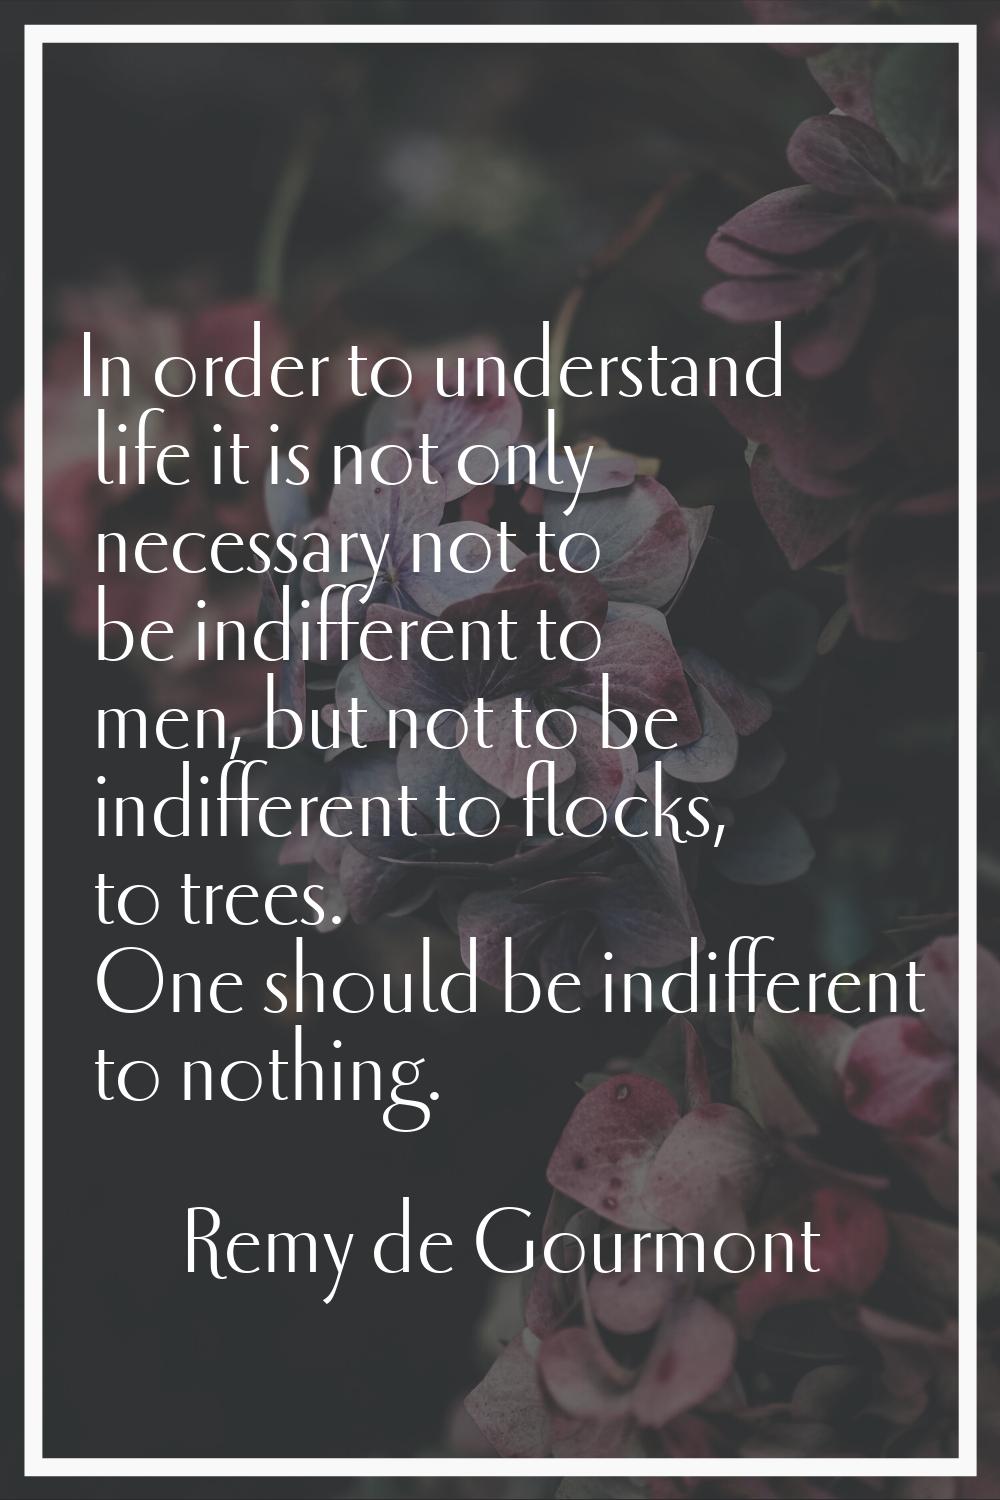 In order to understand life it is not only necessary not to be indifferent to men, but not to be in